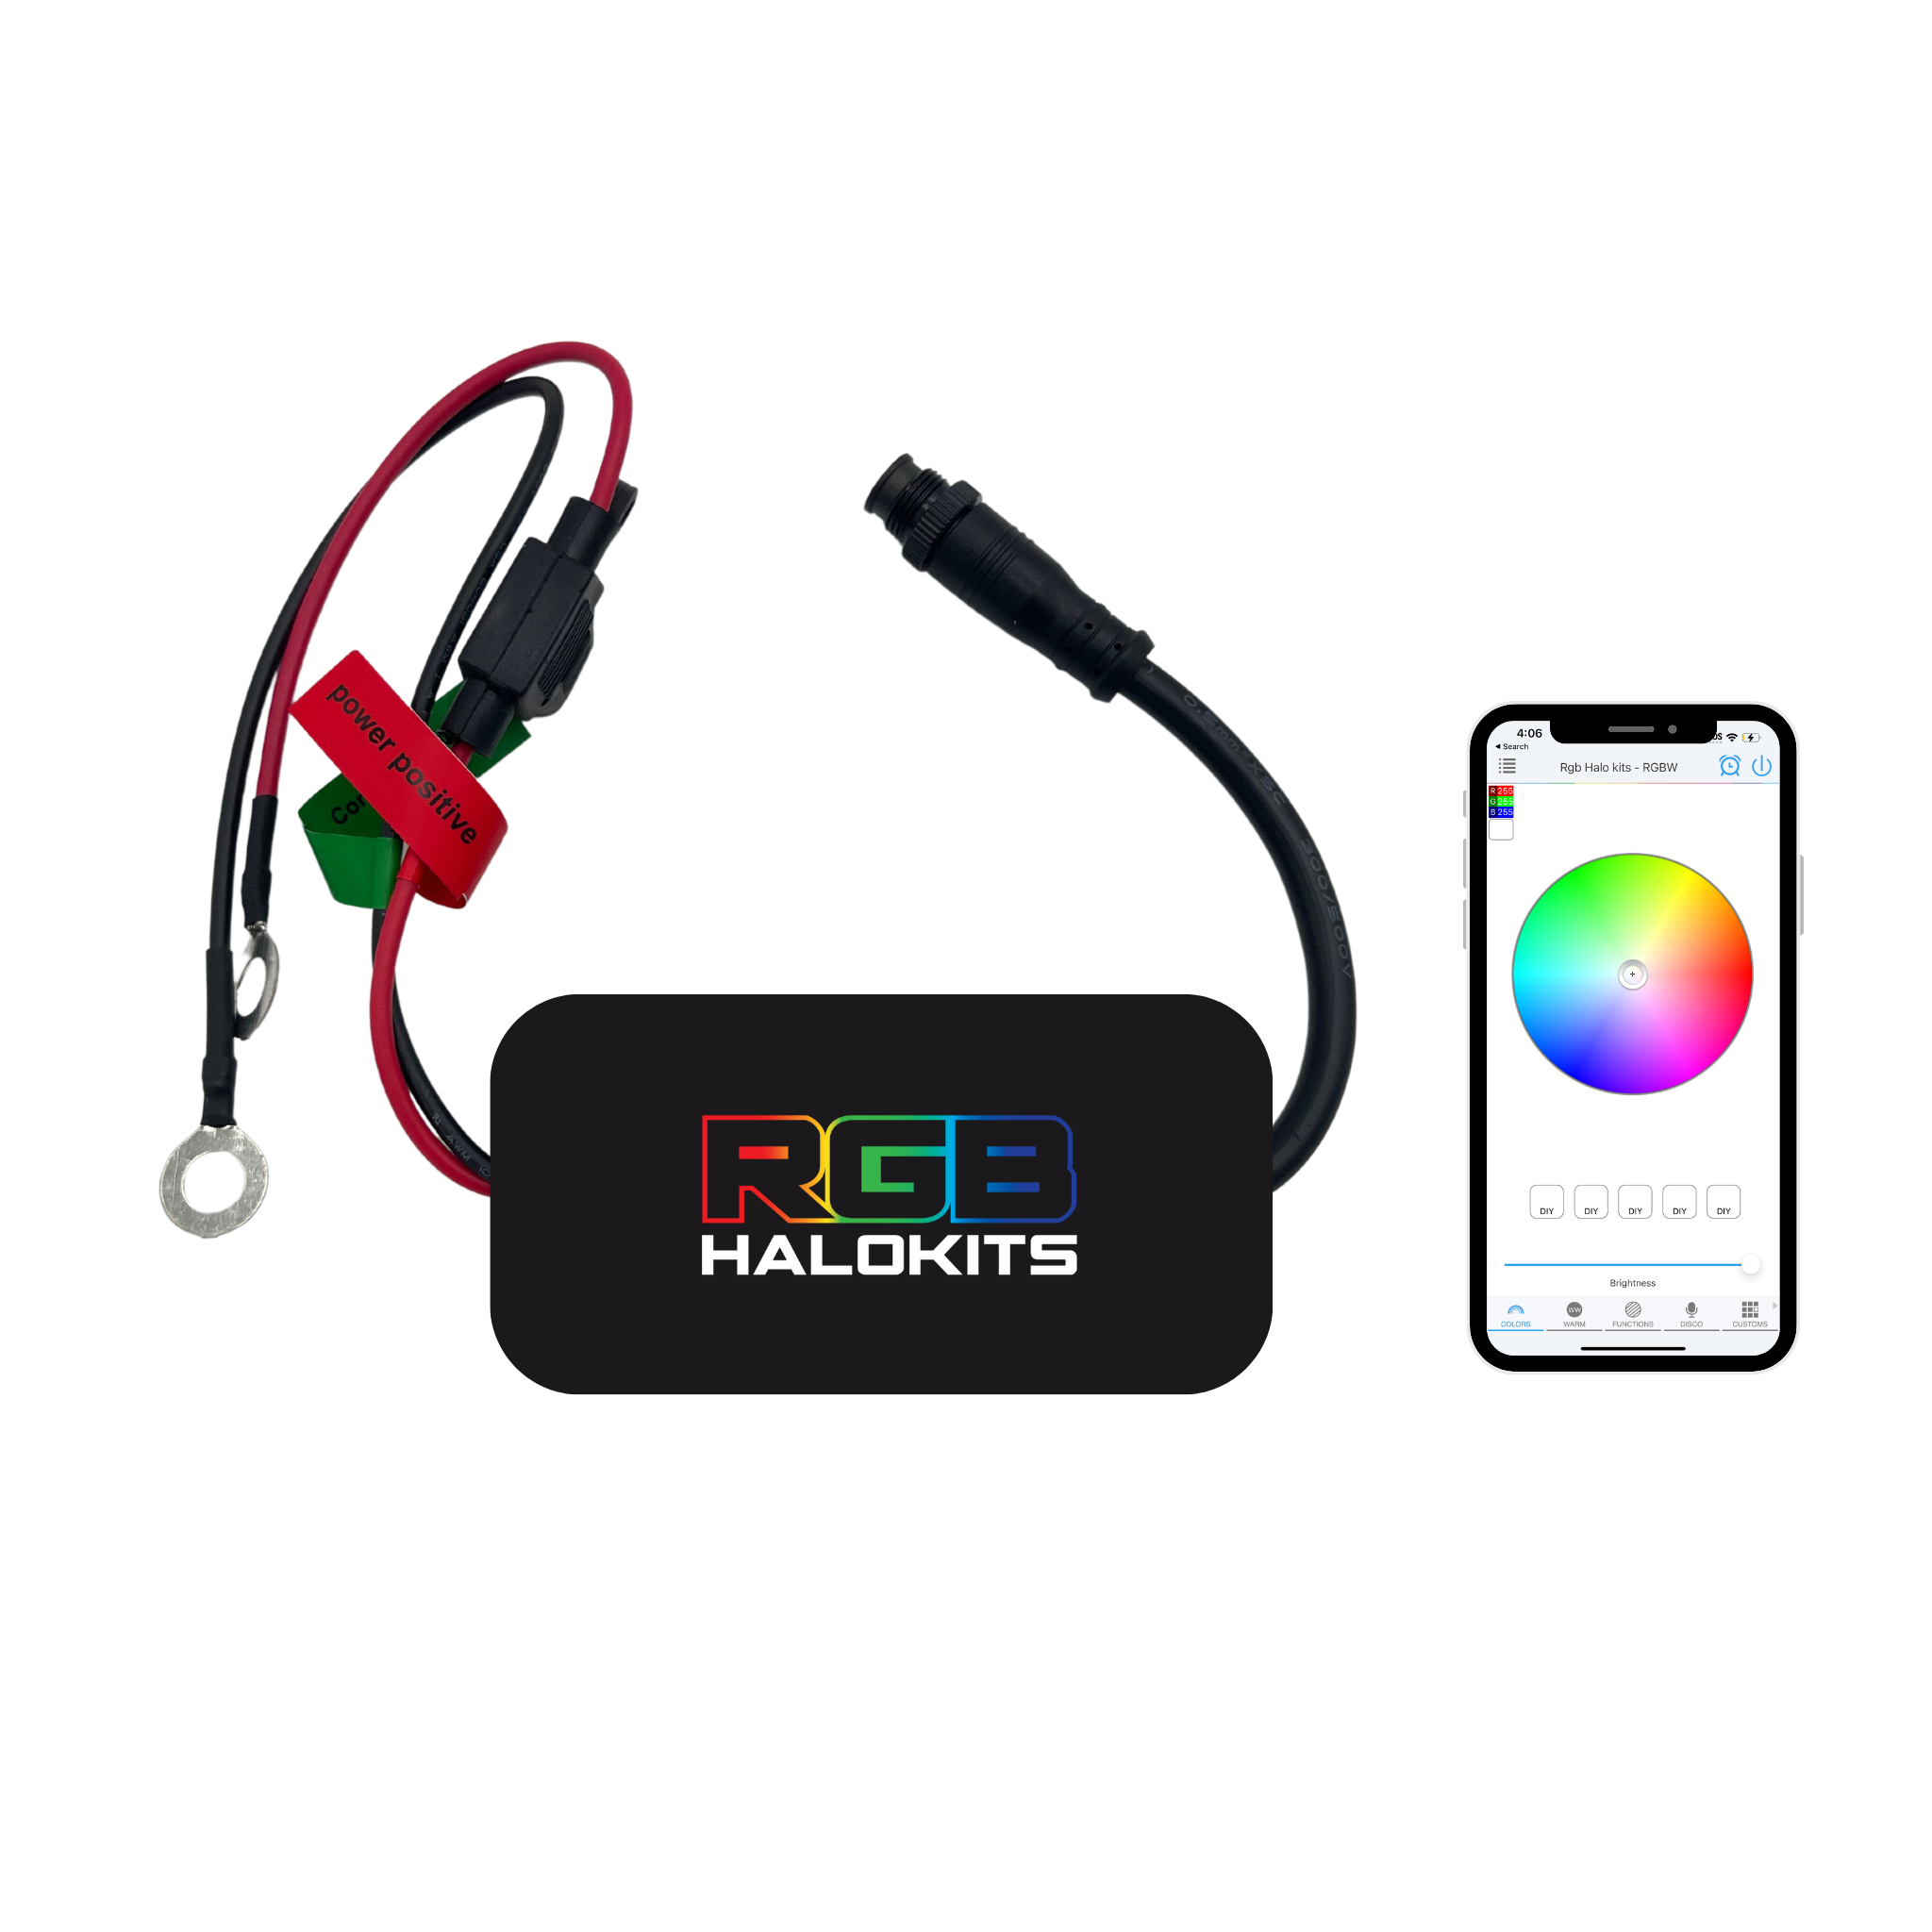 RGB Halo Kits Remotes 4 Output / LED Wheel Rings RGBW Bluetooth Controller Waterproof